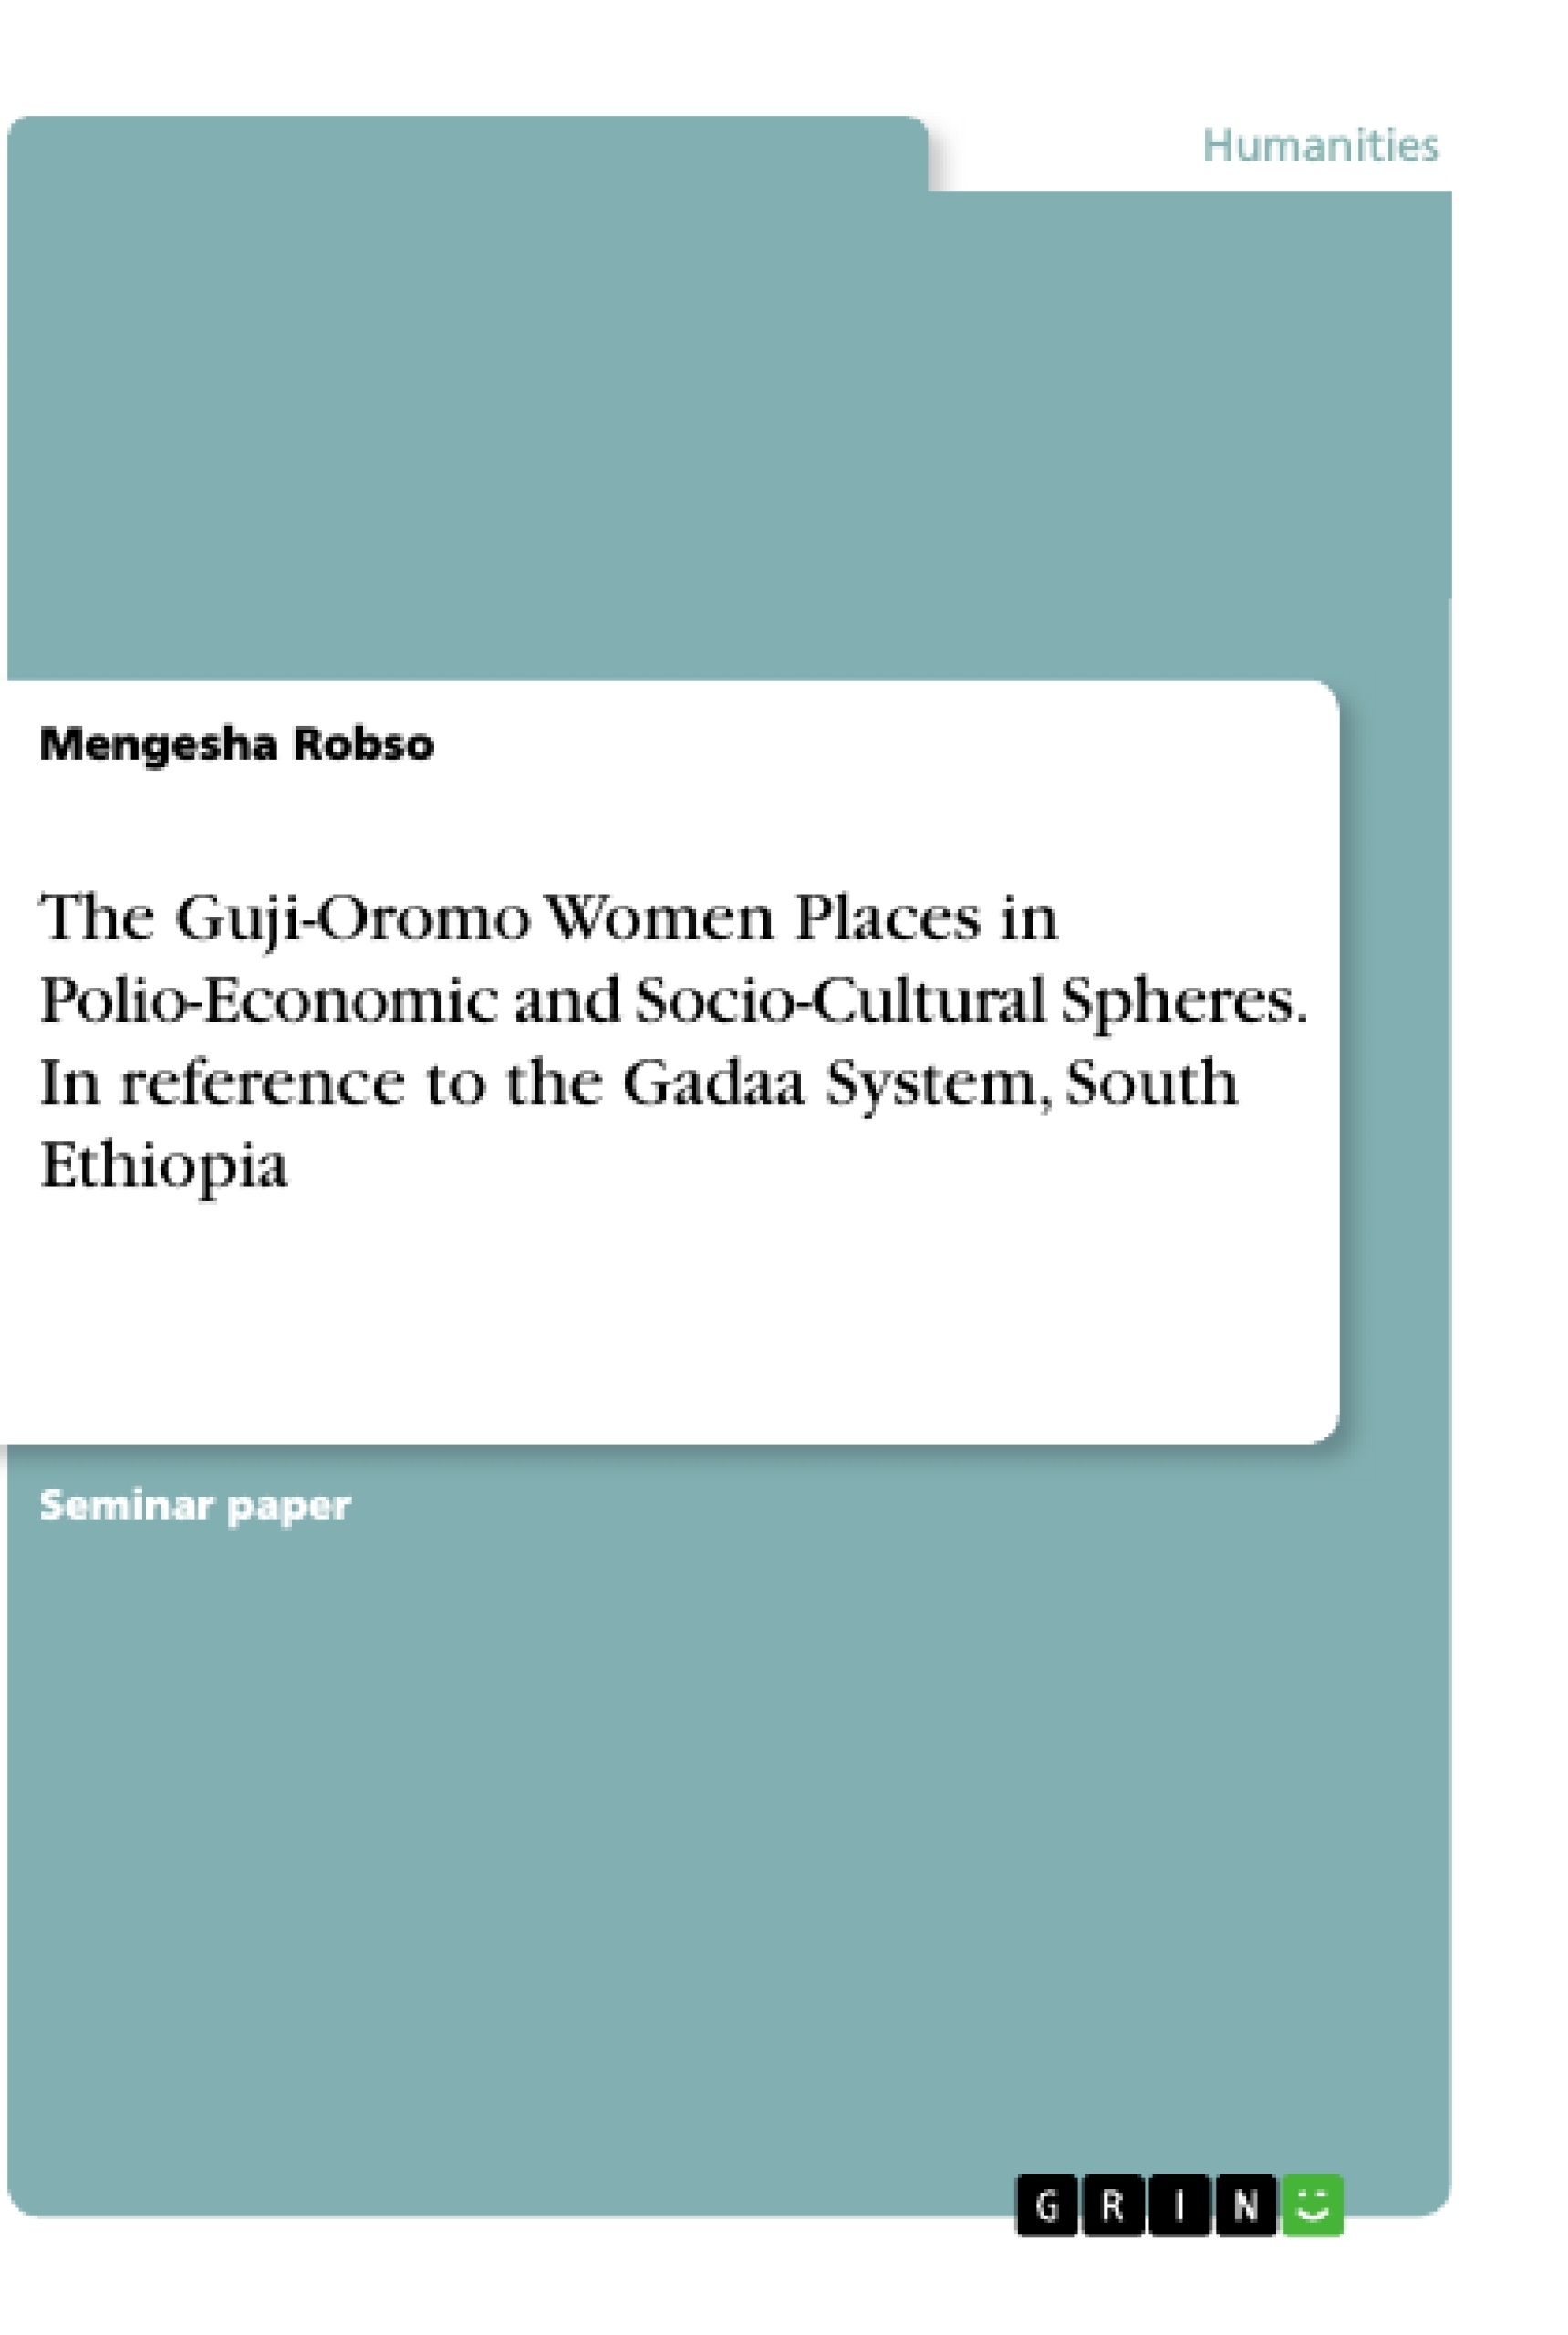 Titre: The Guji-Oromo Women Places in Polio-Economic and Socio-Cultural Spheres. In reference to the Gadaa System, South Ethiopia